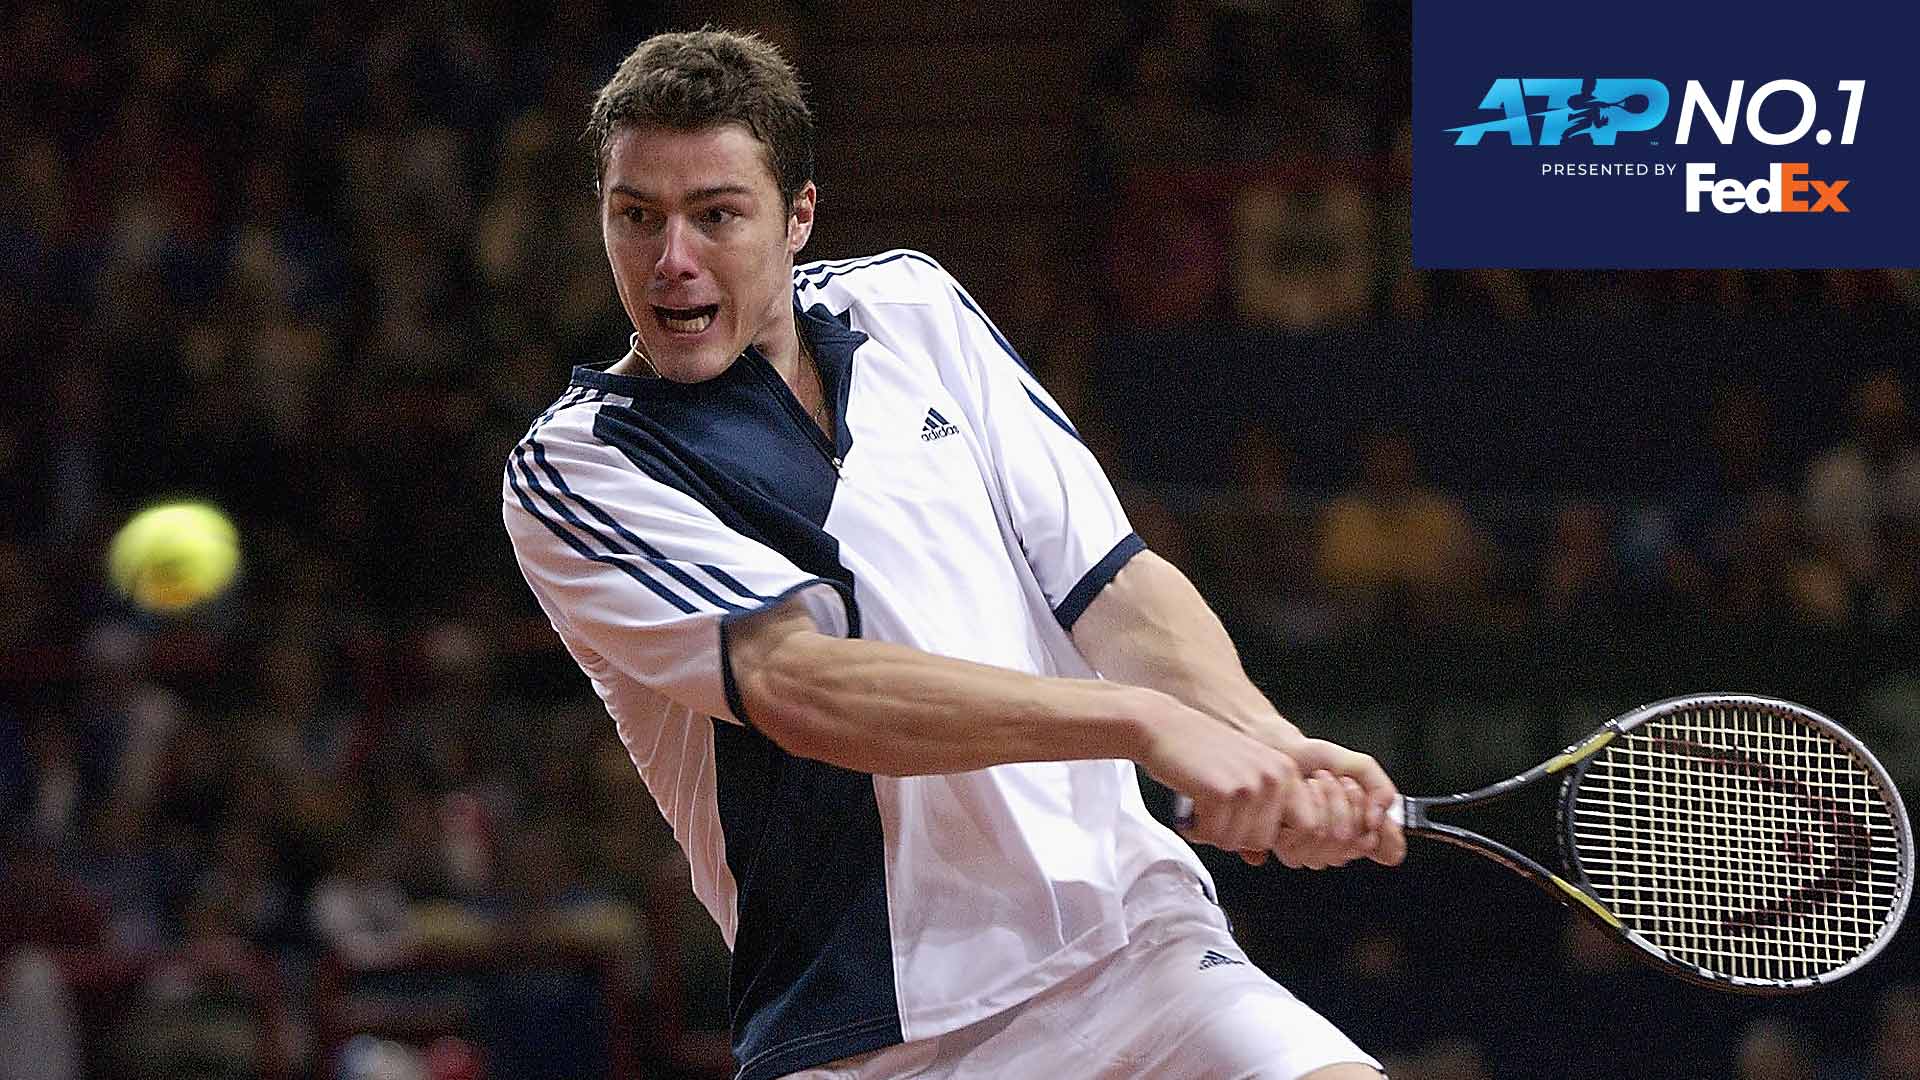 Marat Safin was the second Russian to reach No. 1 in the FedEx ATP Rankings.